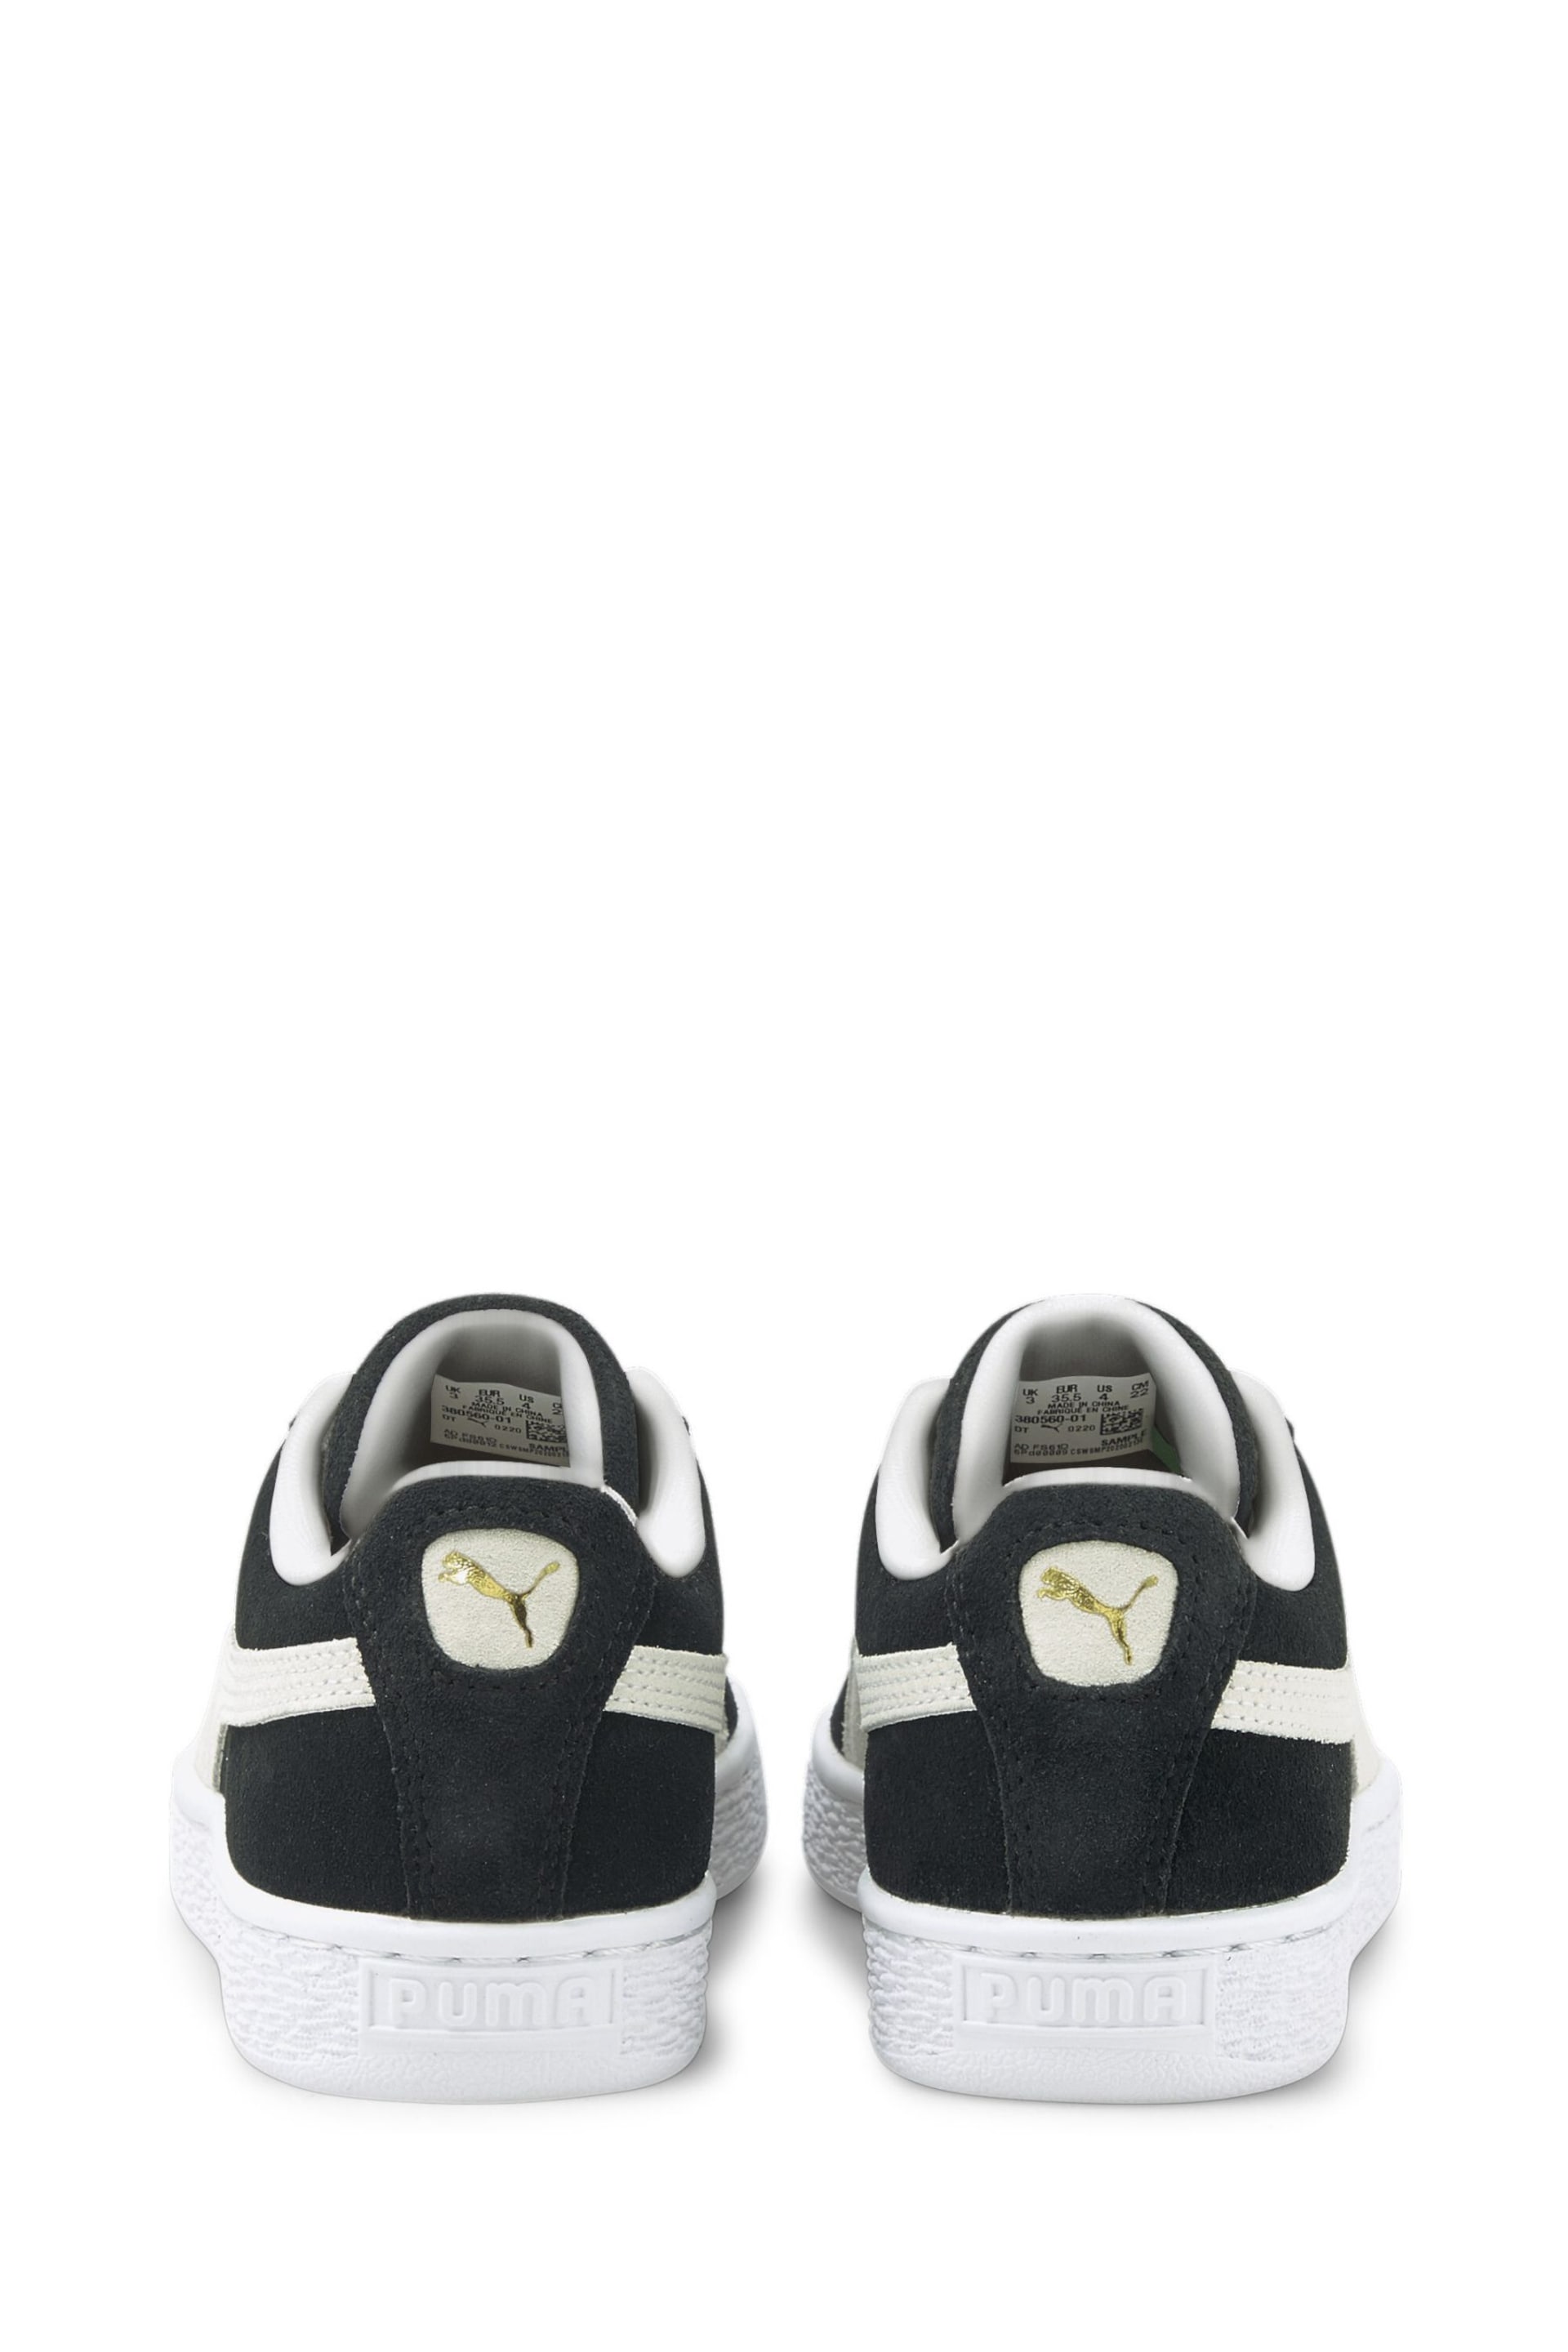 Puma Black Suede Classic XXI Youth Trainers - Image 5 of 7